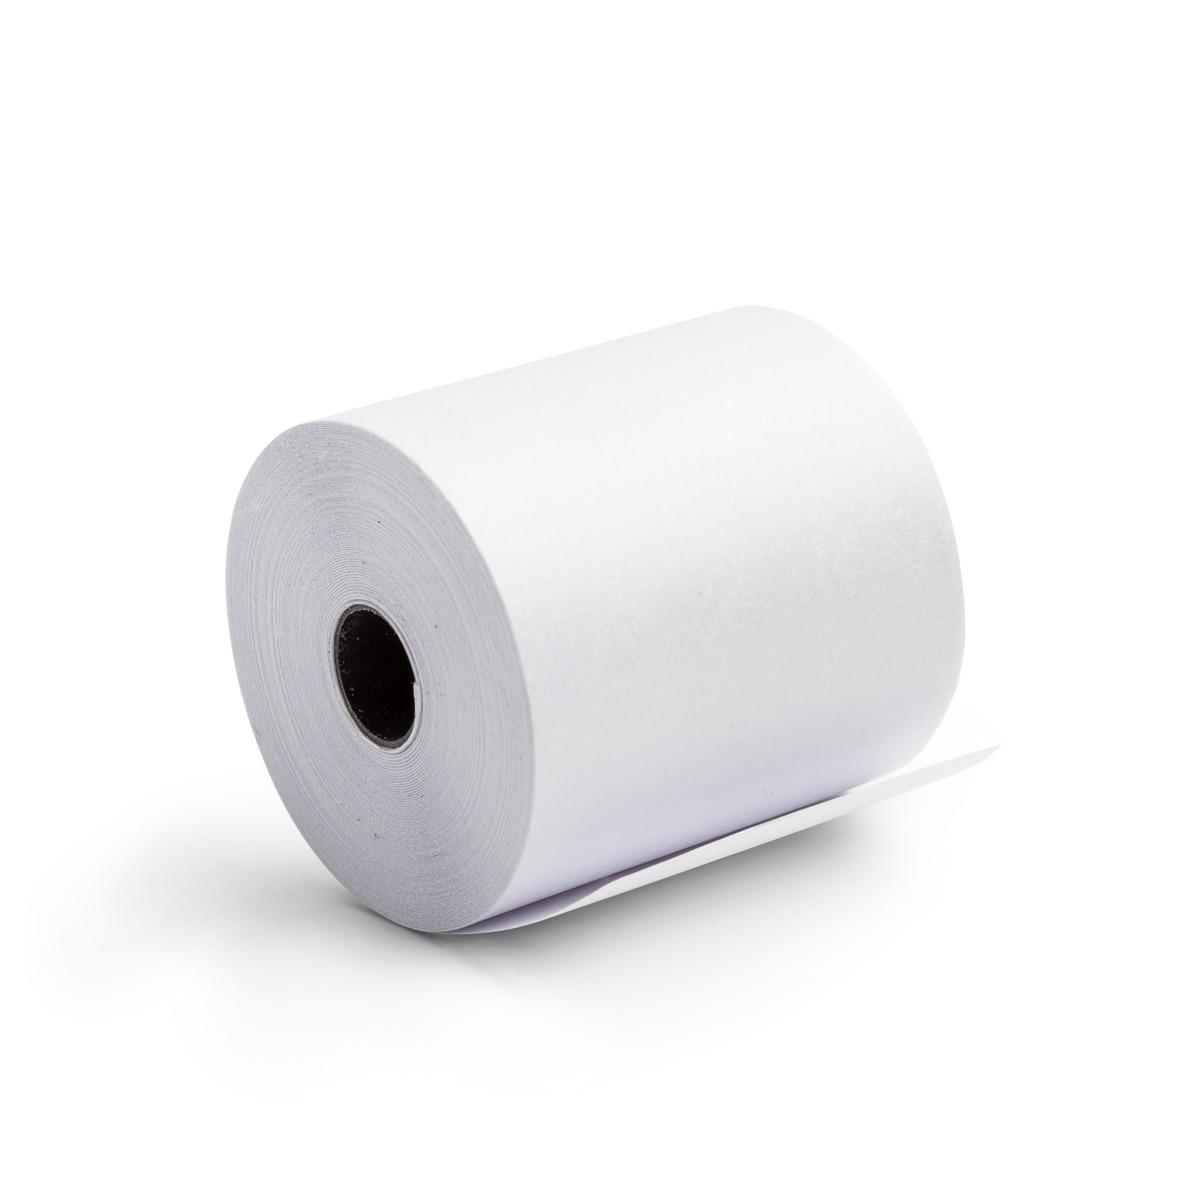 ROLLO PAPEL P/MAQ 37 MM X 30 MTS X 10 TERMICO MAUGER